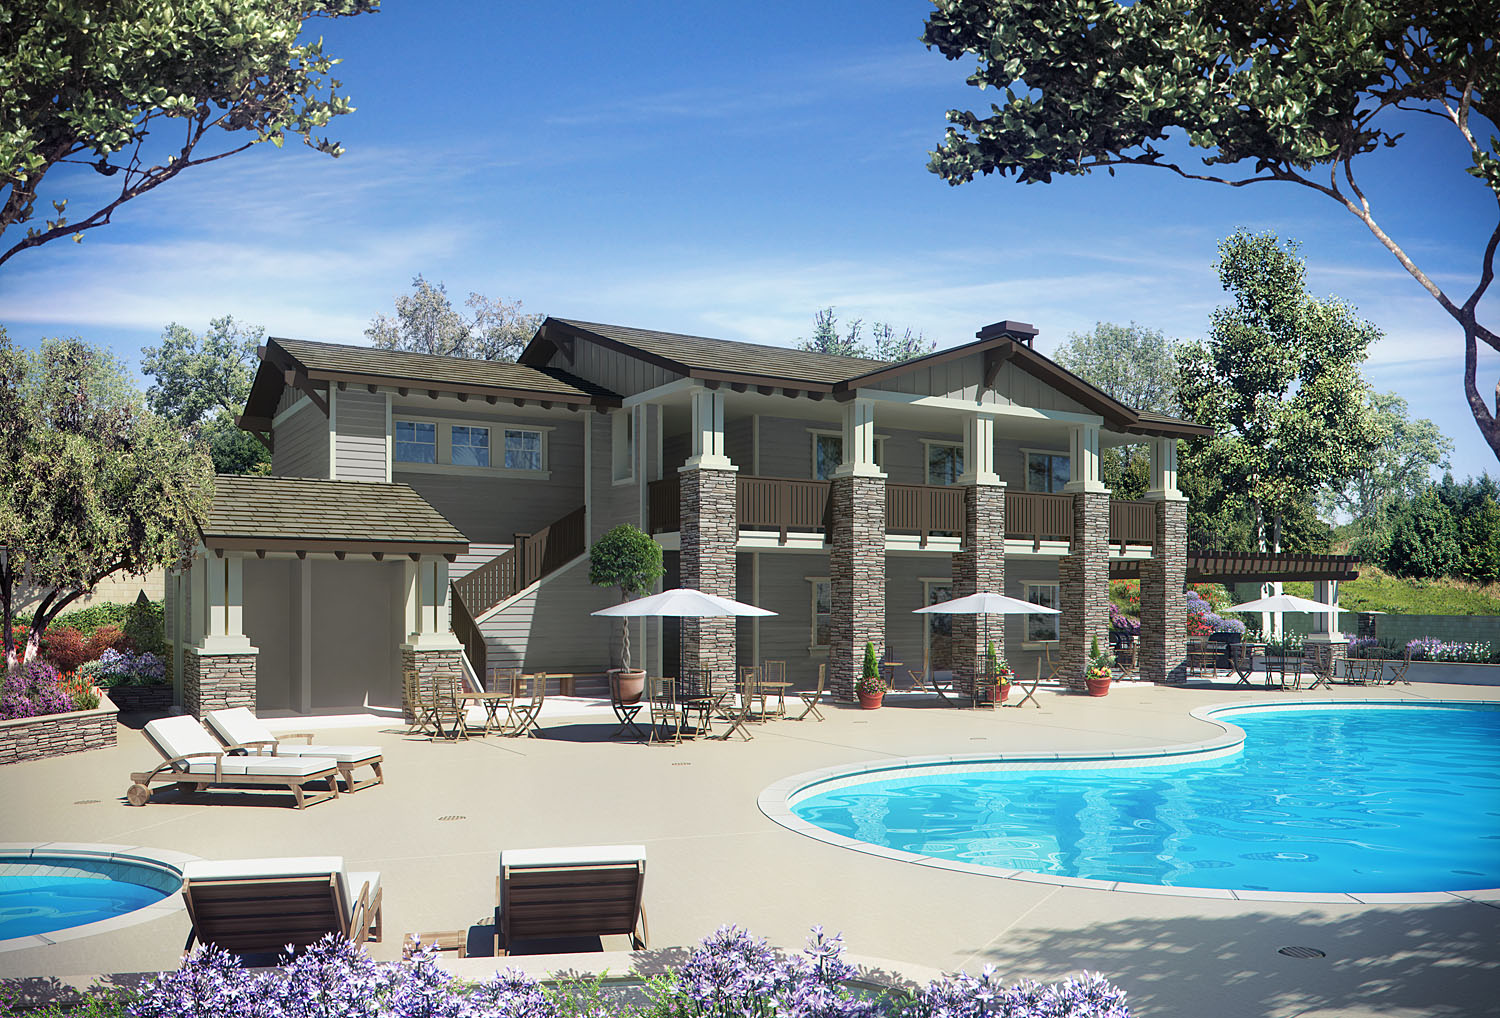 The Palisades Recreation Center will include a heated pool and spa, a full fitness facility and yoga room, and a gourmet kitchen and TV lounge area where residents can entertain family and guests.